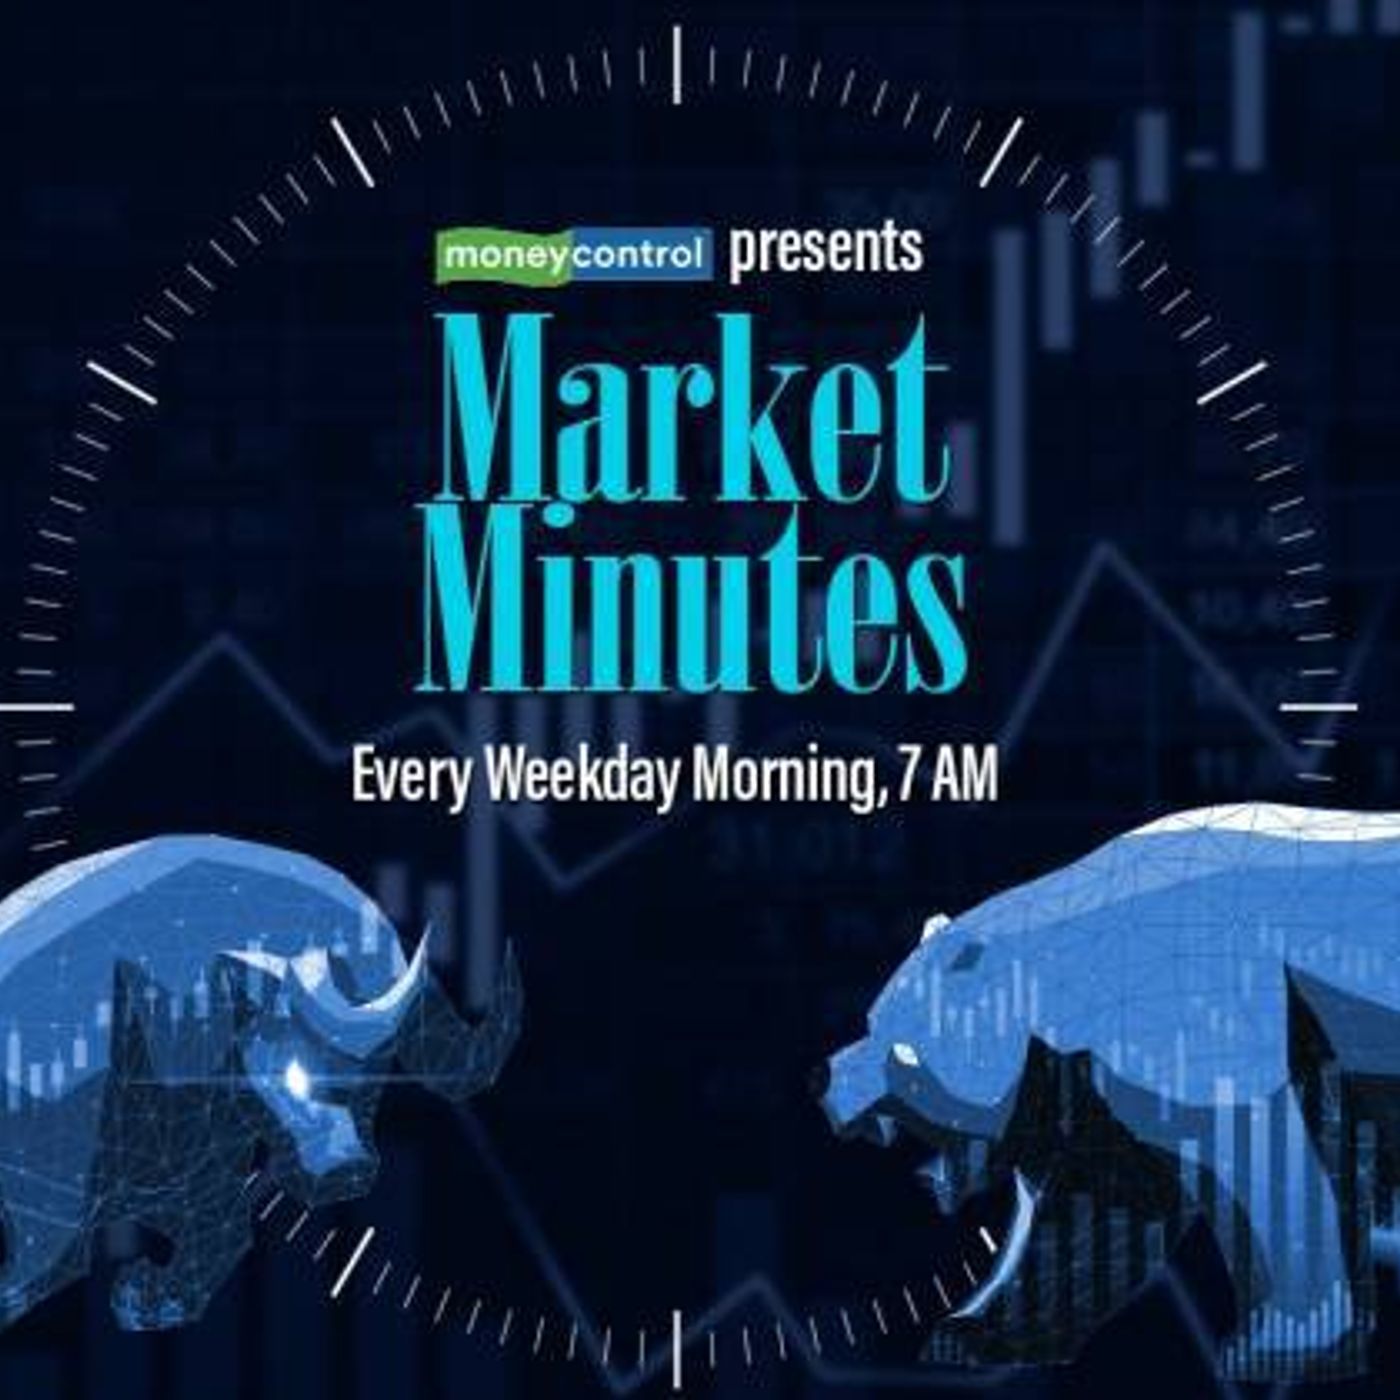 4158: US January inflation print, delayed rate cut expectations and more | Market Minutes